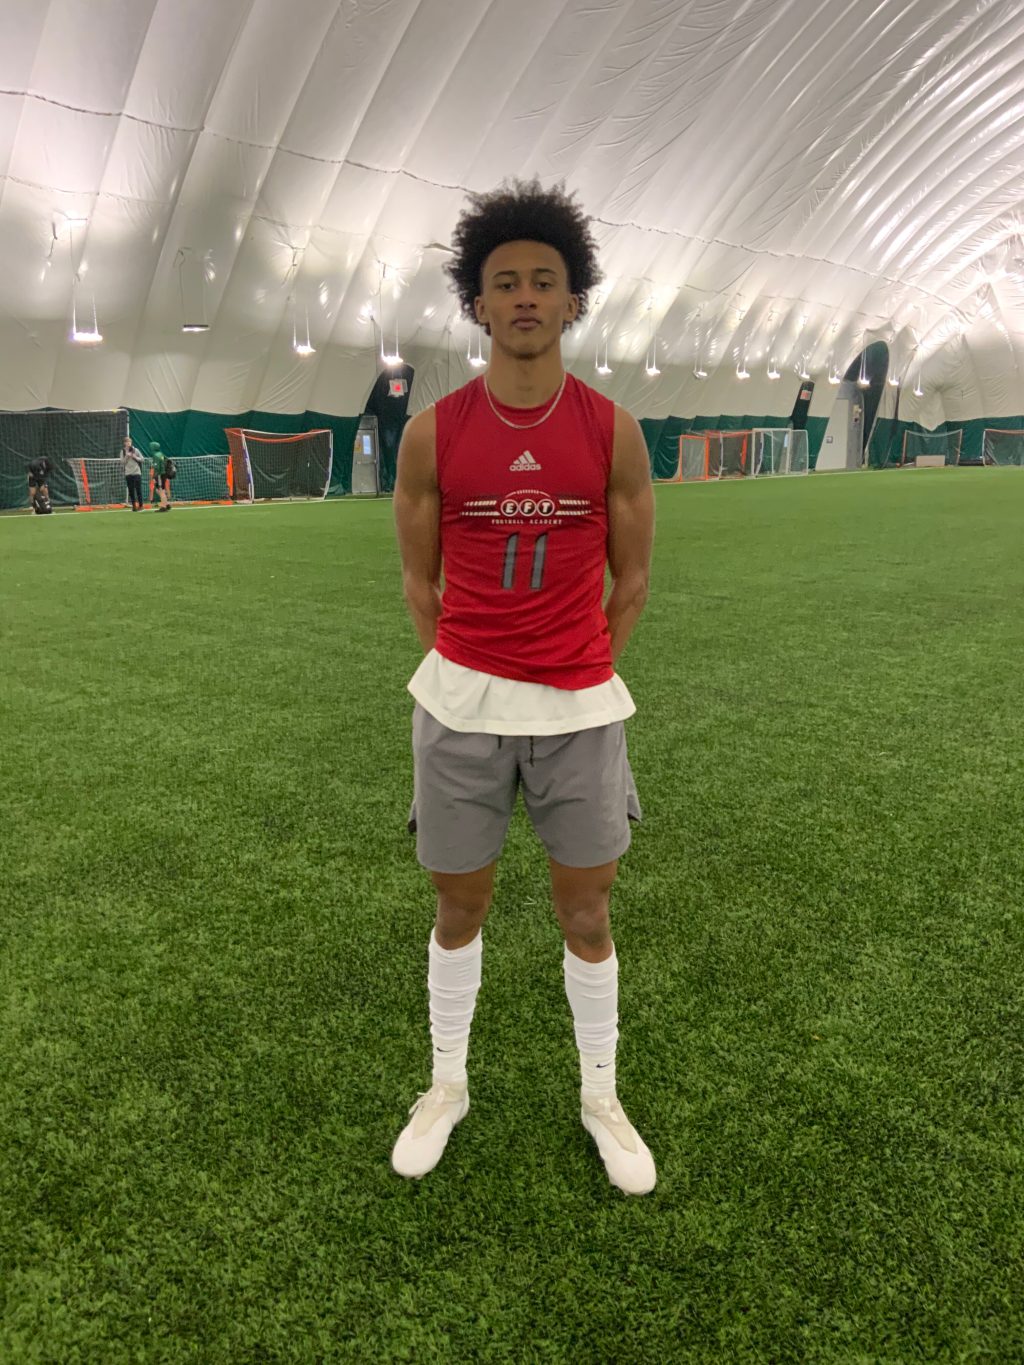 Class of 2022 Wide outs who have stood out in June